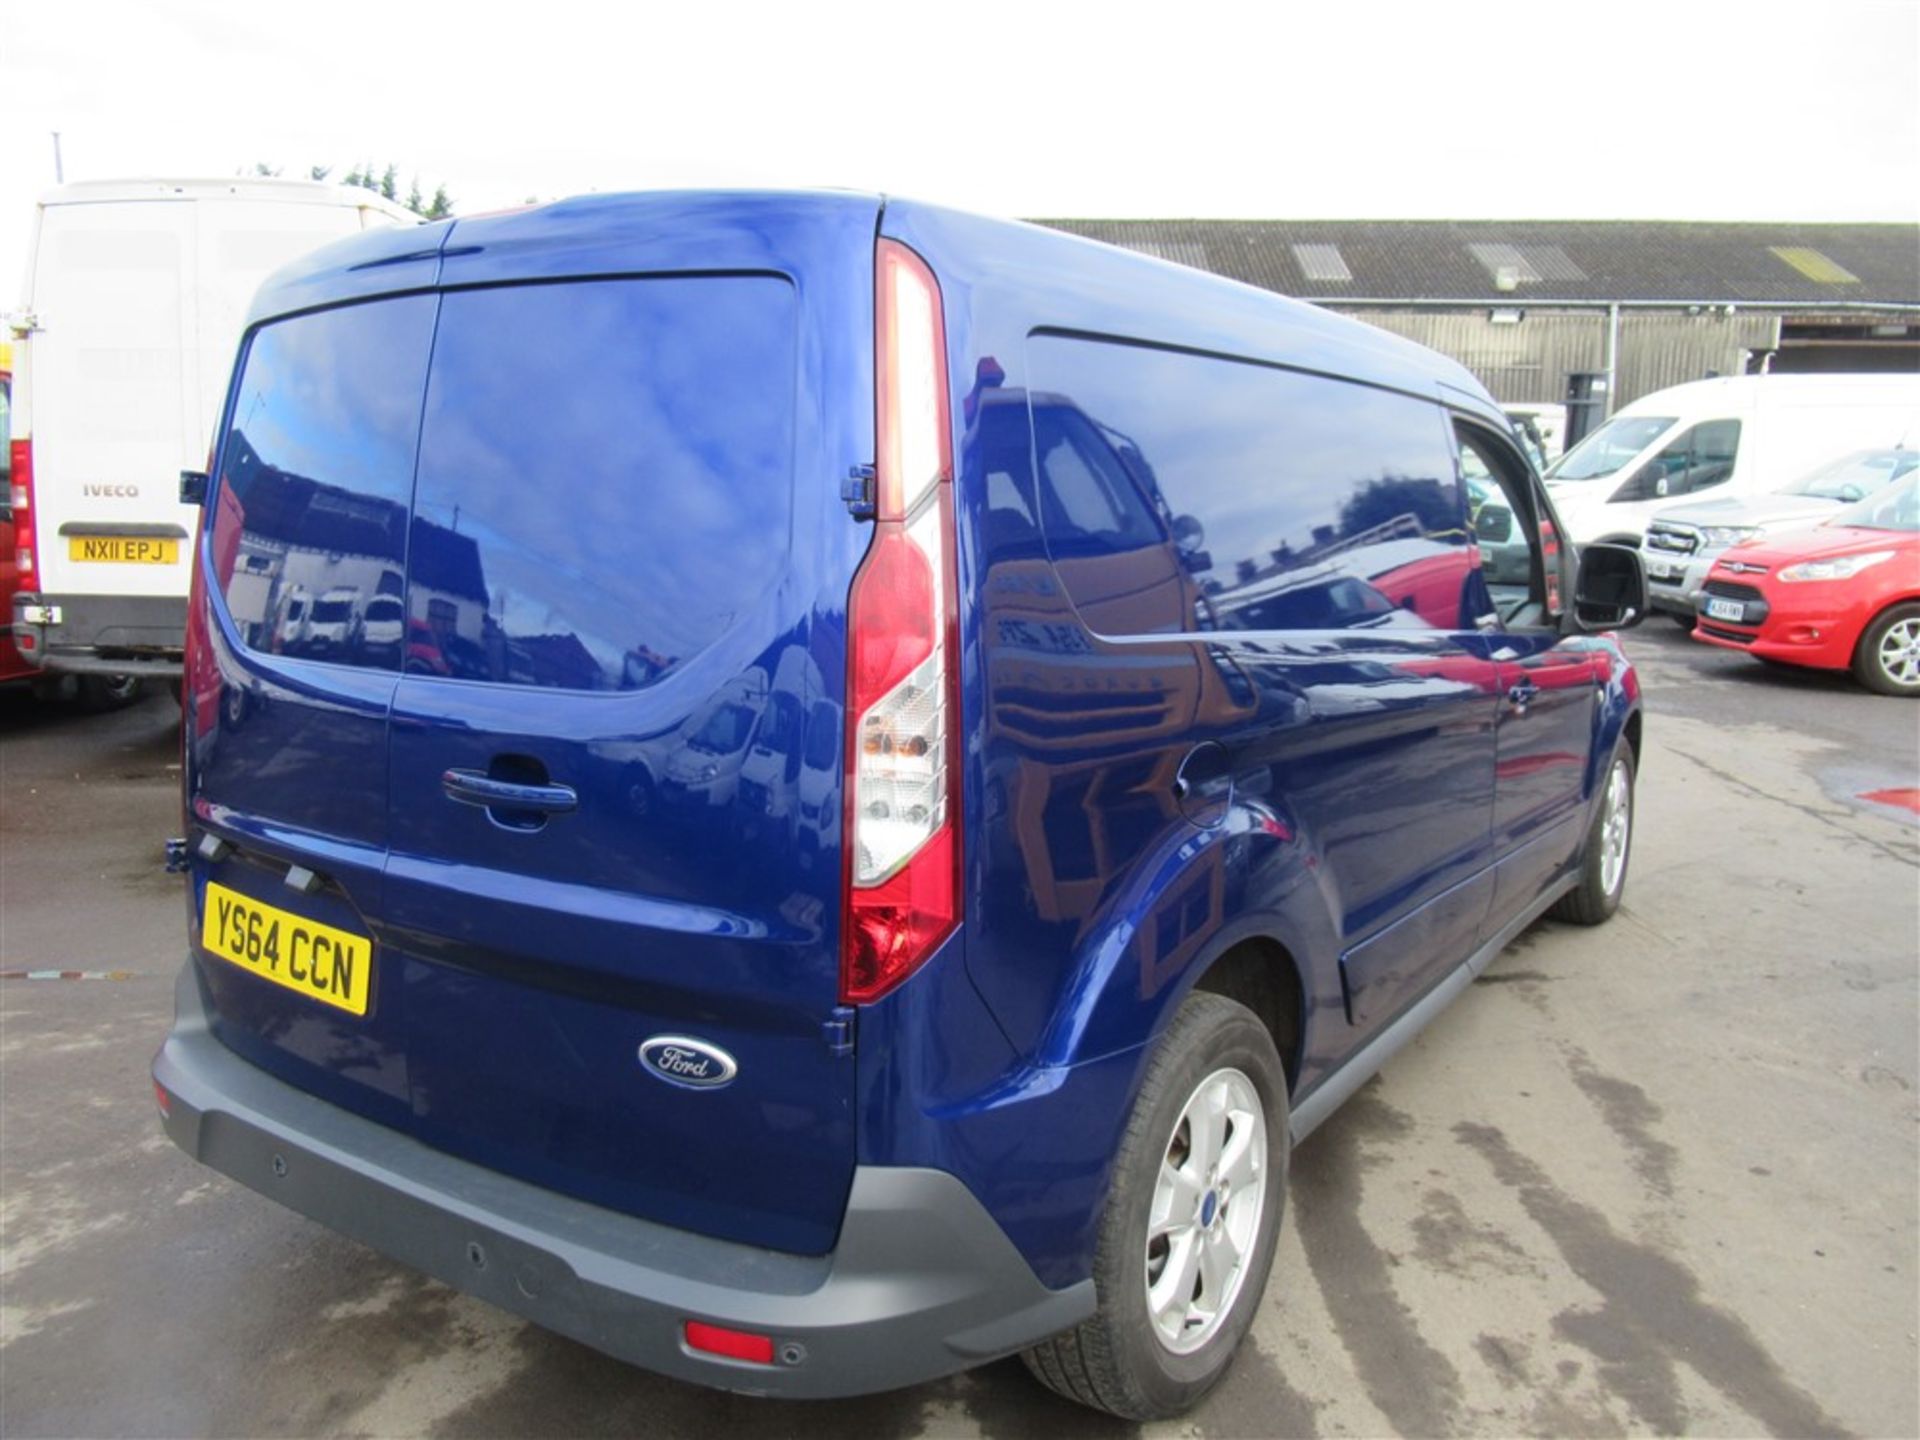 64 reg FORD TRANSIT CONNECT 240 LIMITED, 1ST REG 12/14, 128144M WARRANTED, V5 HERE, 1 OWNER FROM NEW - Bild 4 aus 7